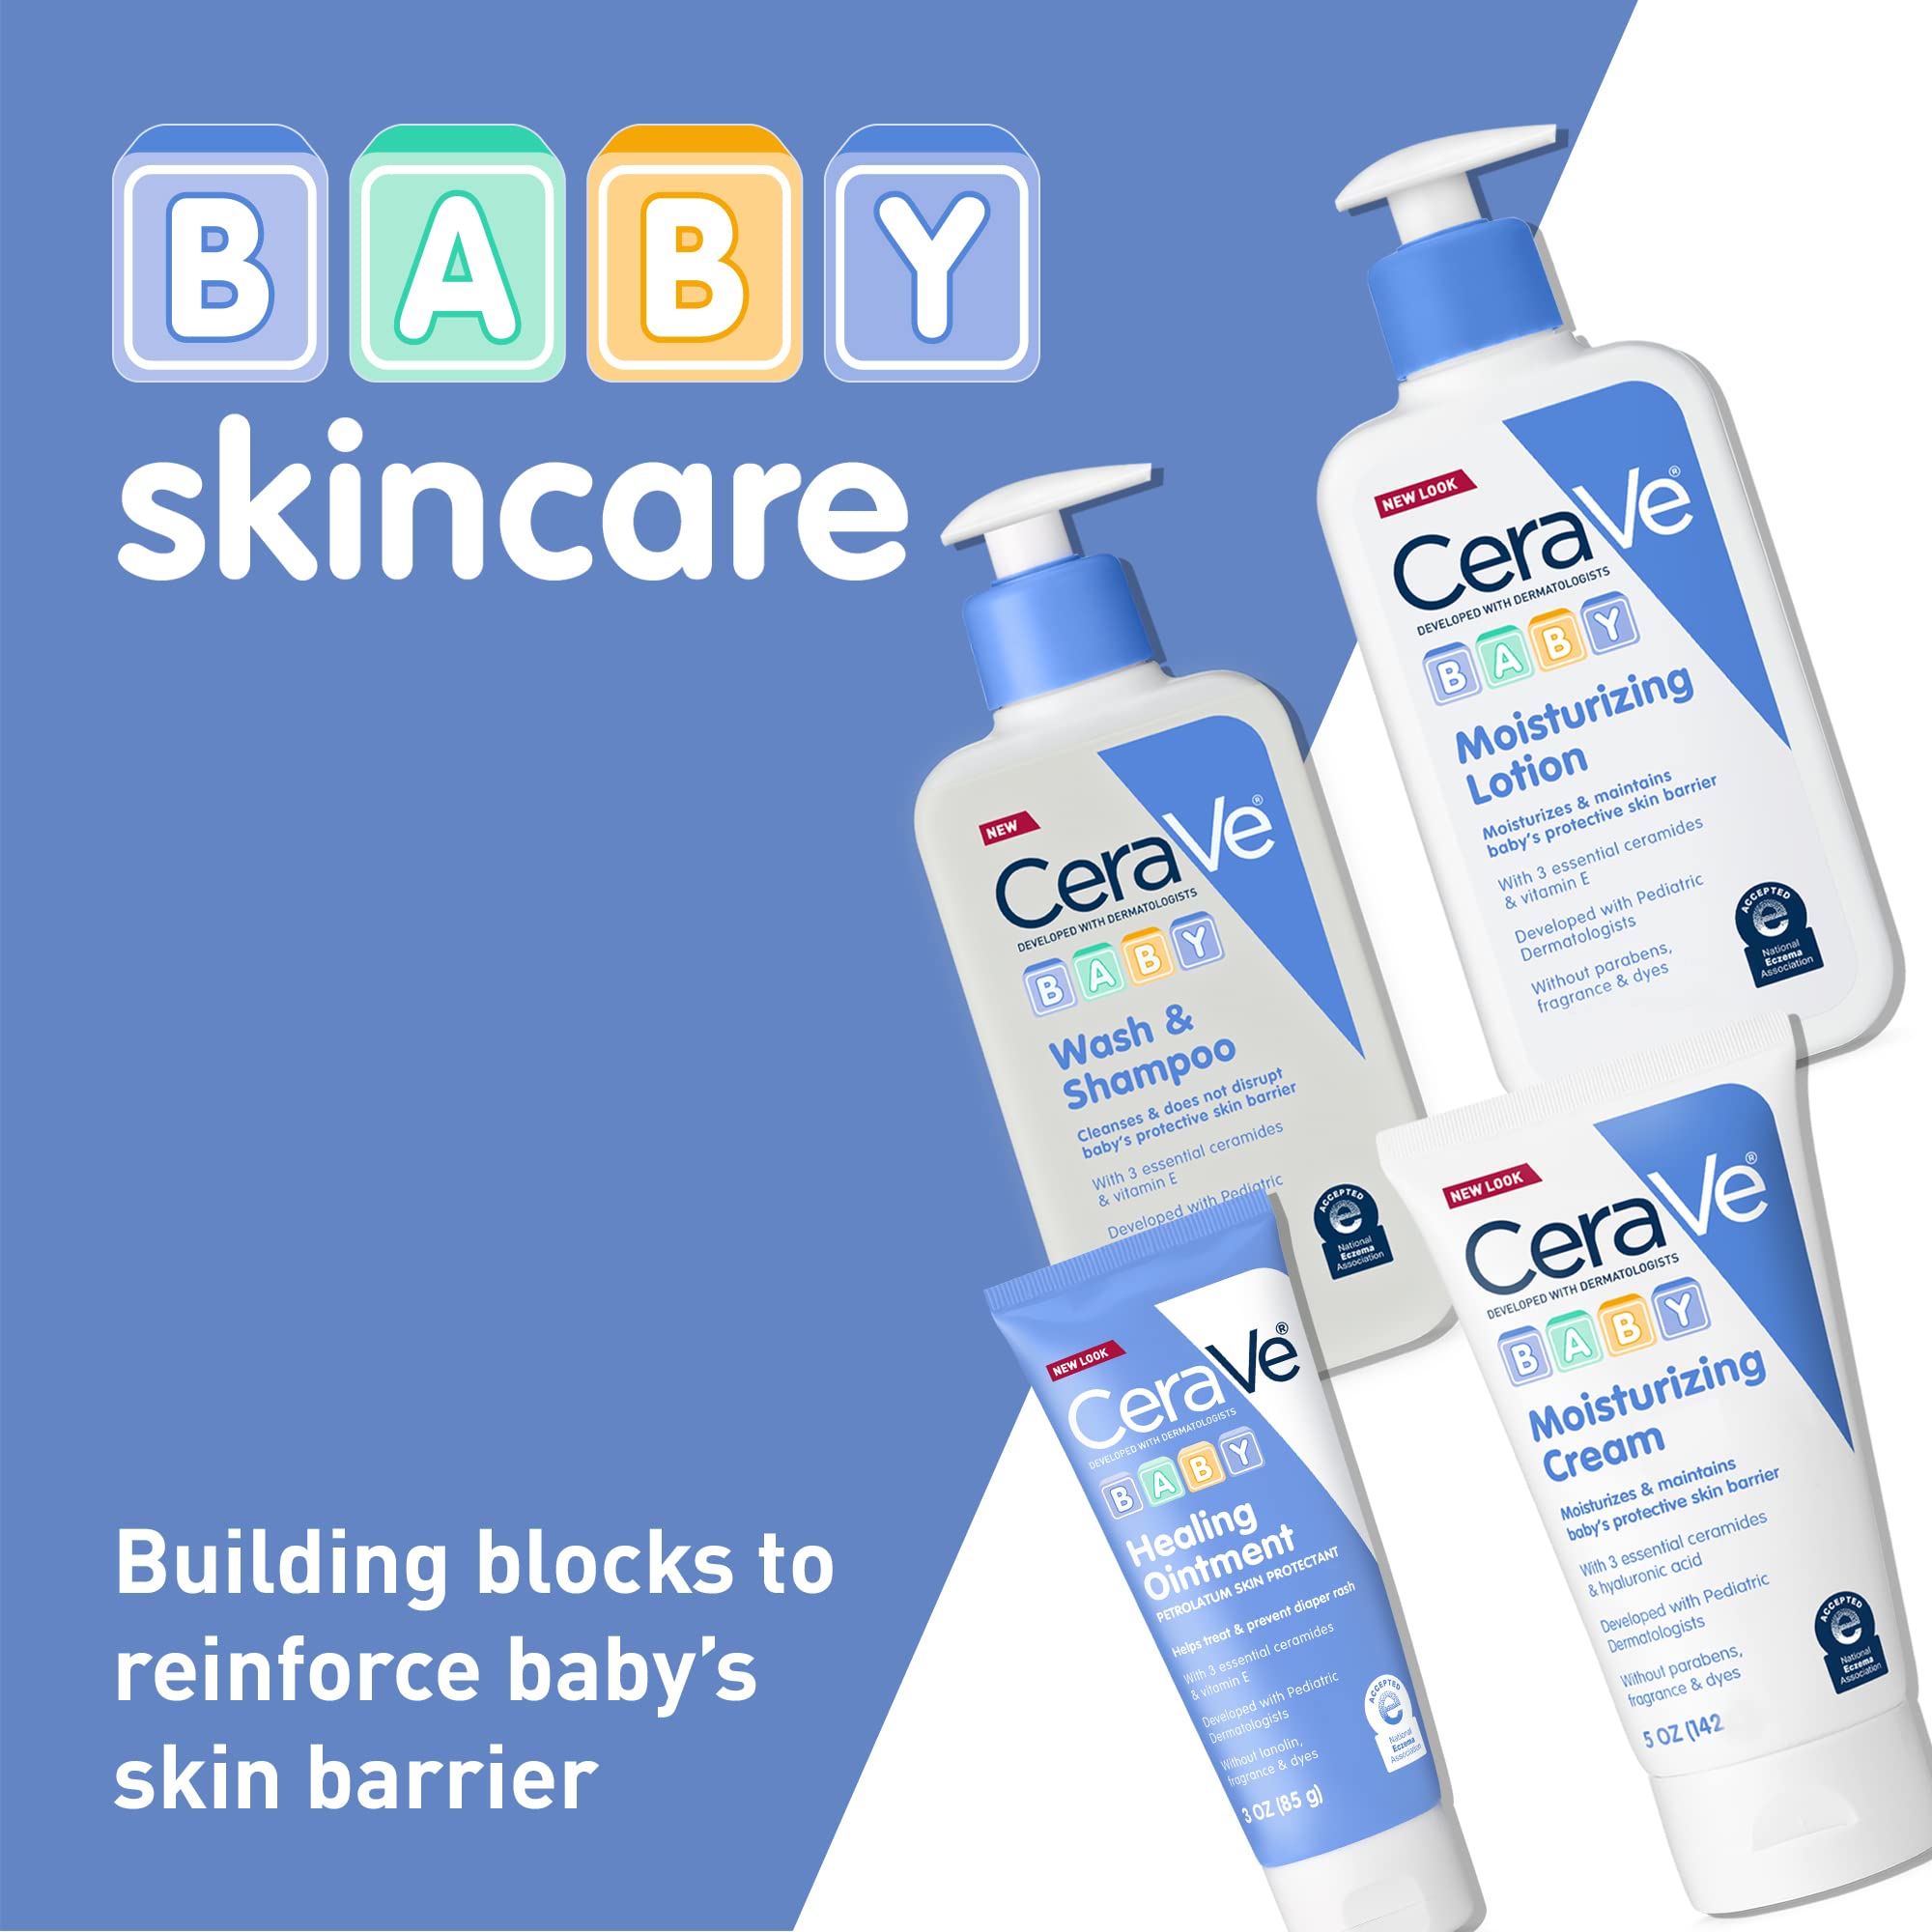 CeraVe Baby Wash & Shampoo | Fragrance, Paraben, & Sulfate Free Shampoo for Tear-Free Baby Bath Time | 8 Ounce